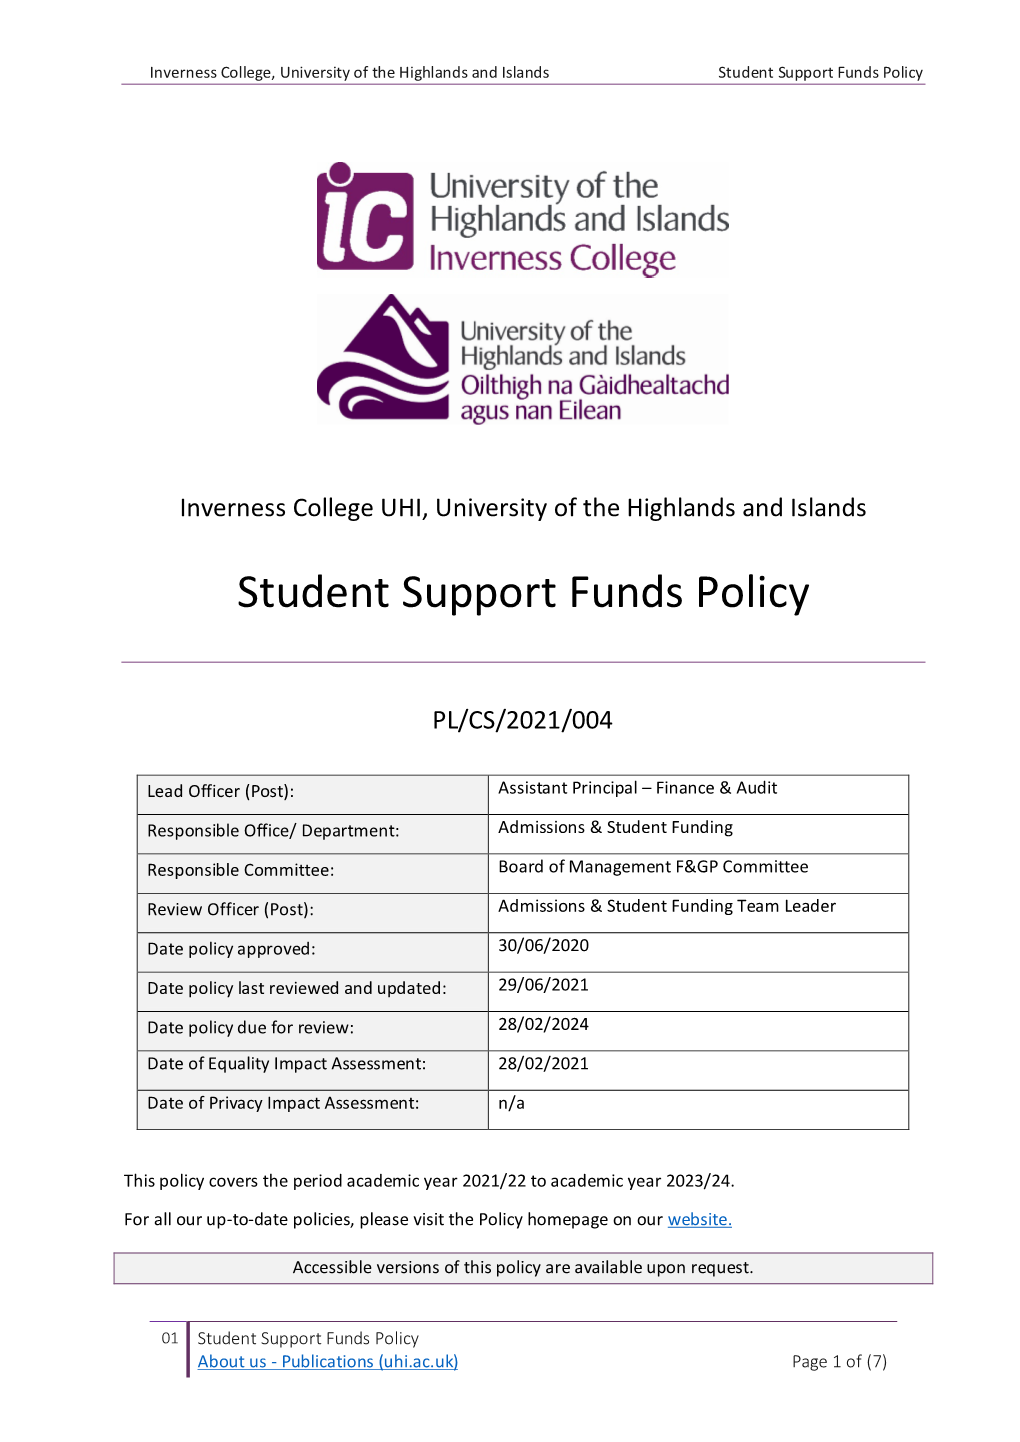 Student Support Funds Policy